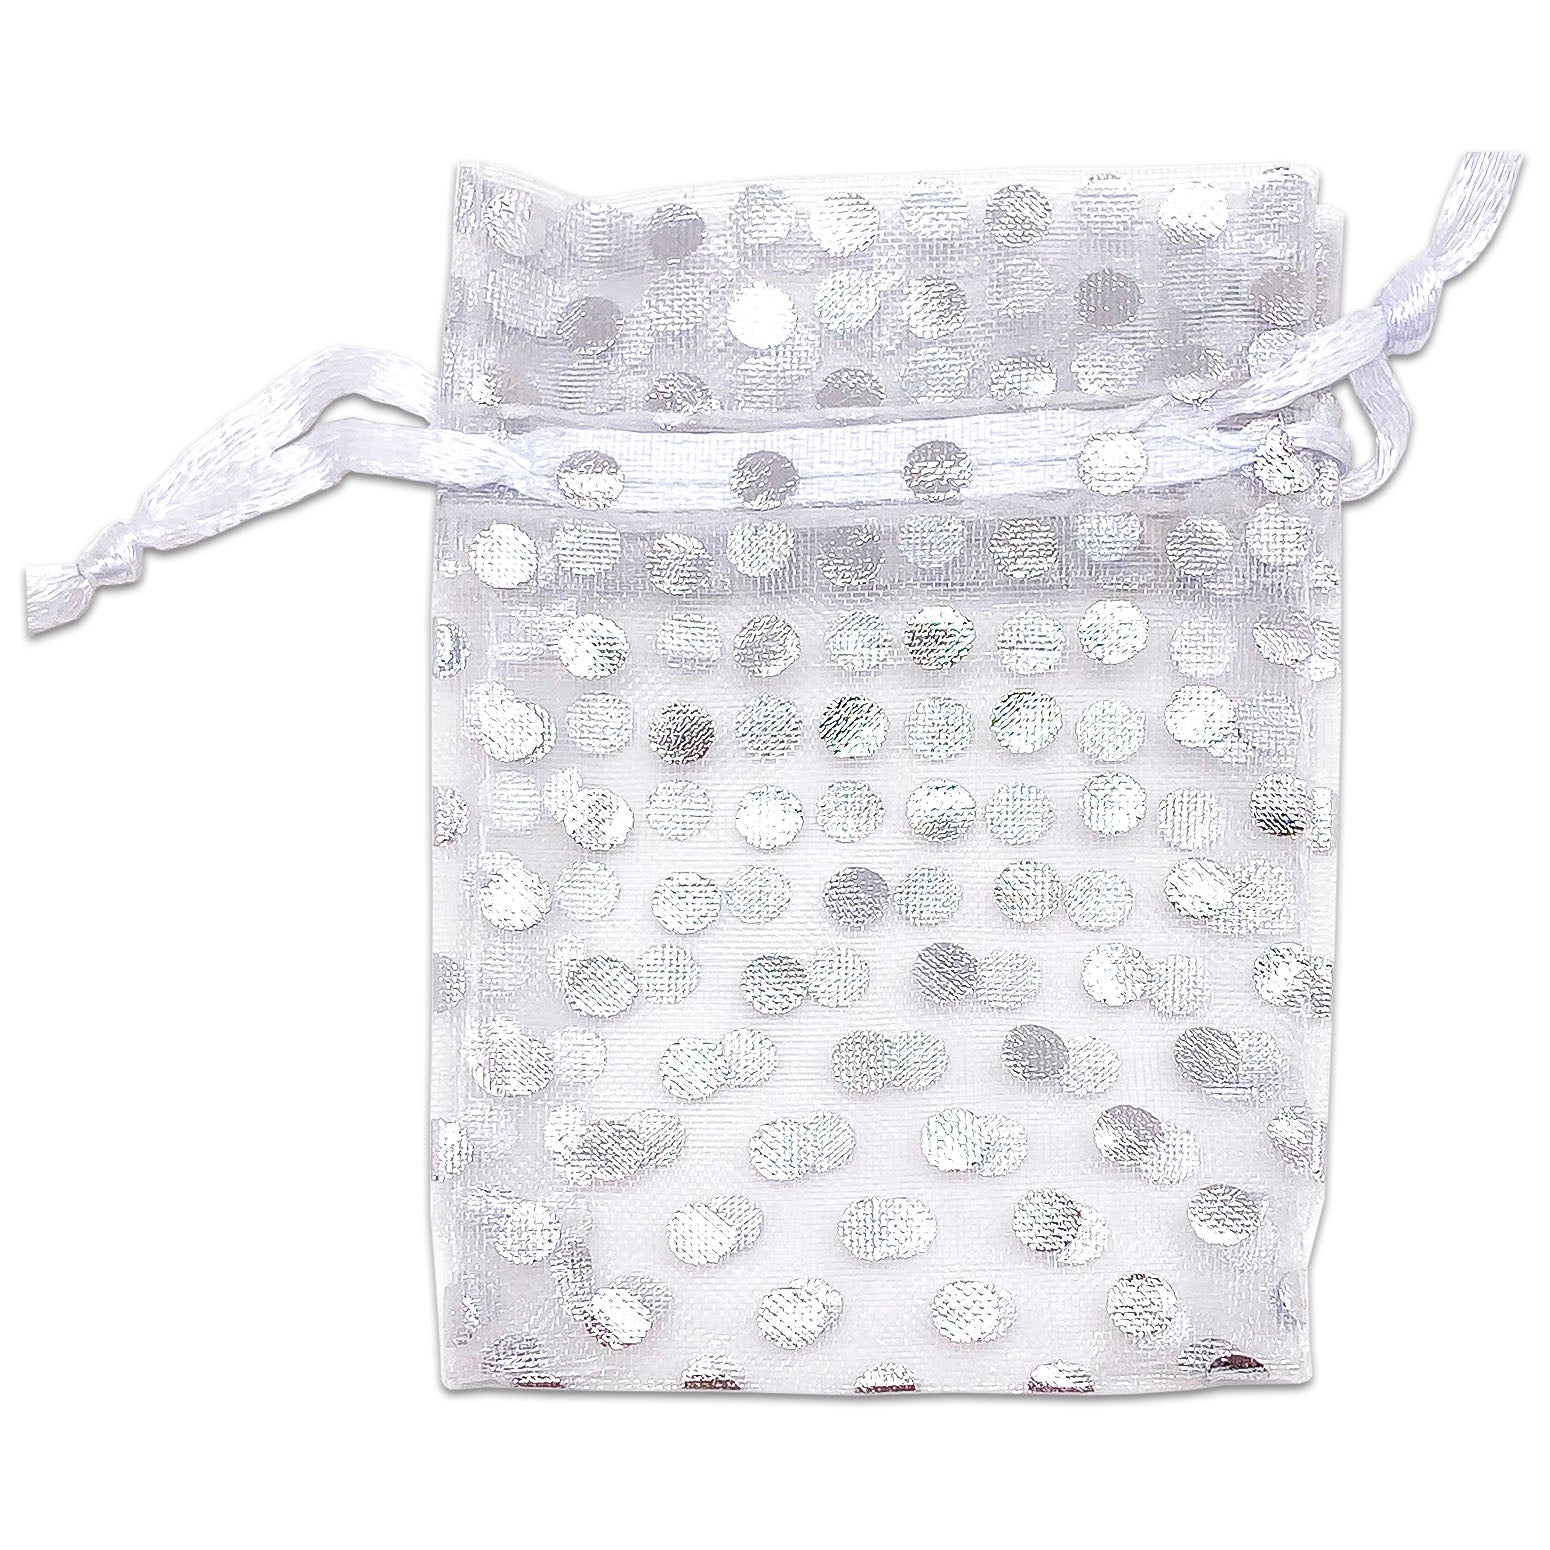 White with Silver Polka Dot Organza Drawstring Pouch Gift Bags